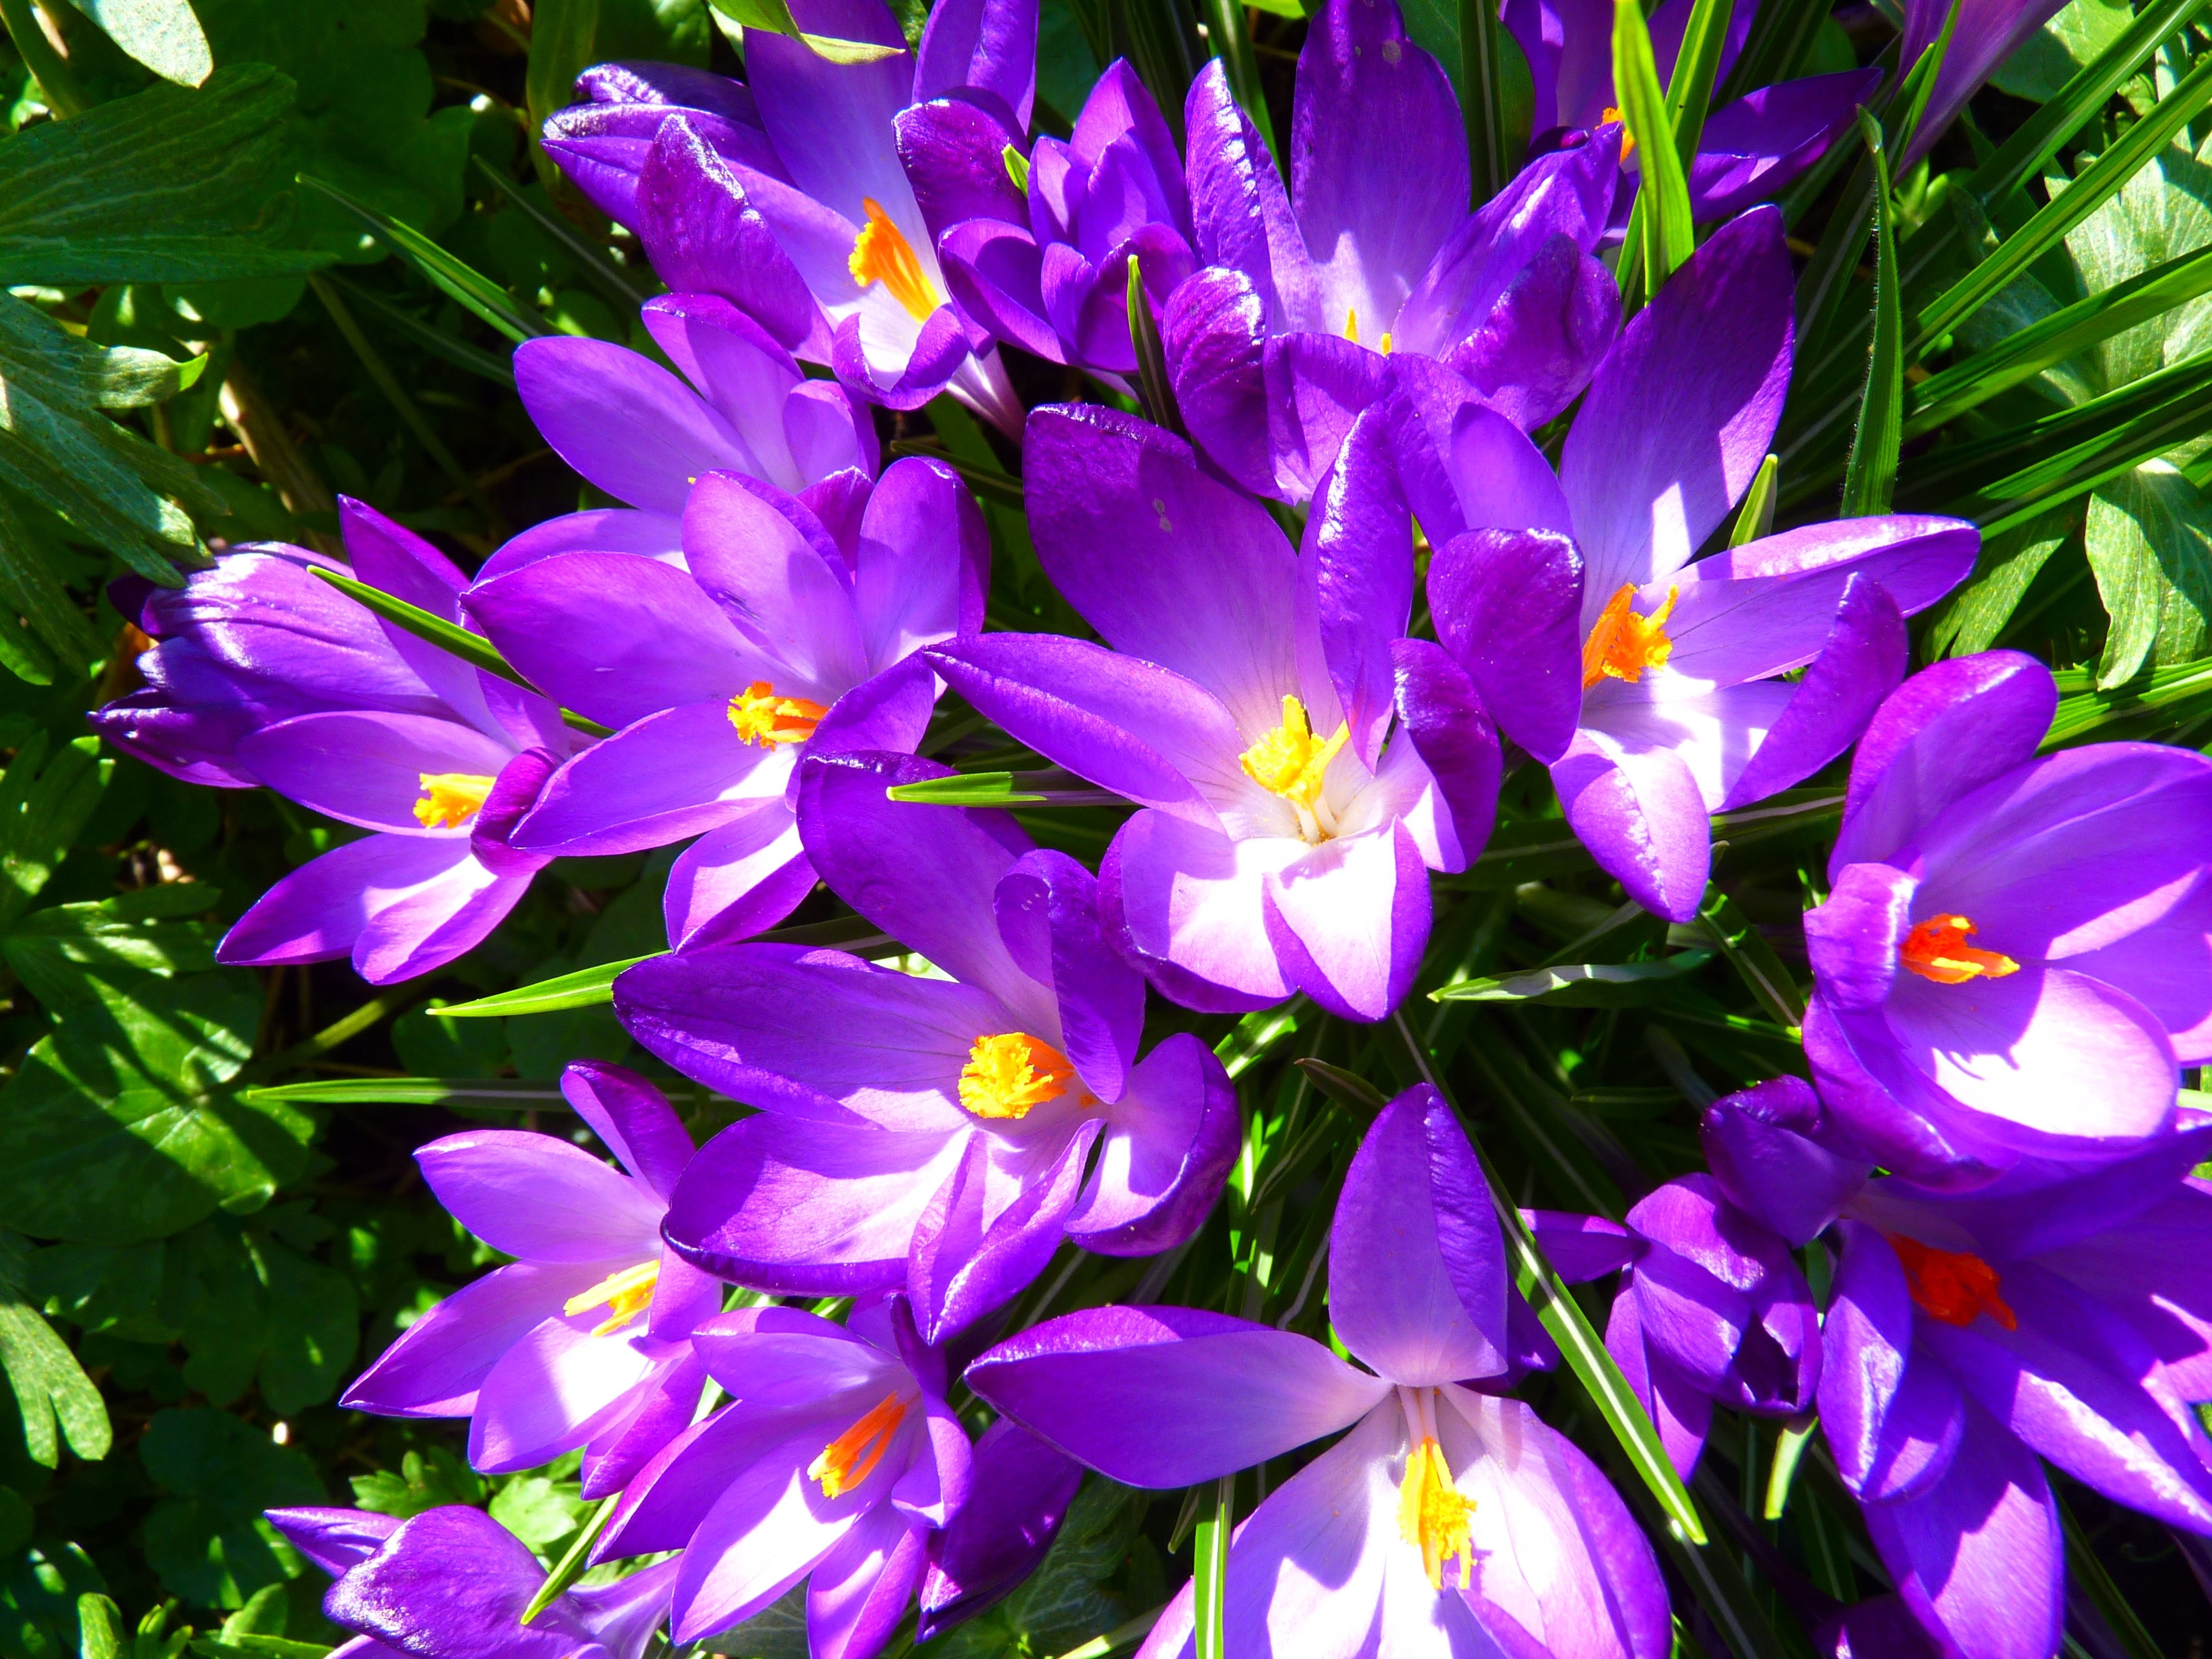 purple and yellow flower with green leaves under the sun